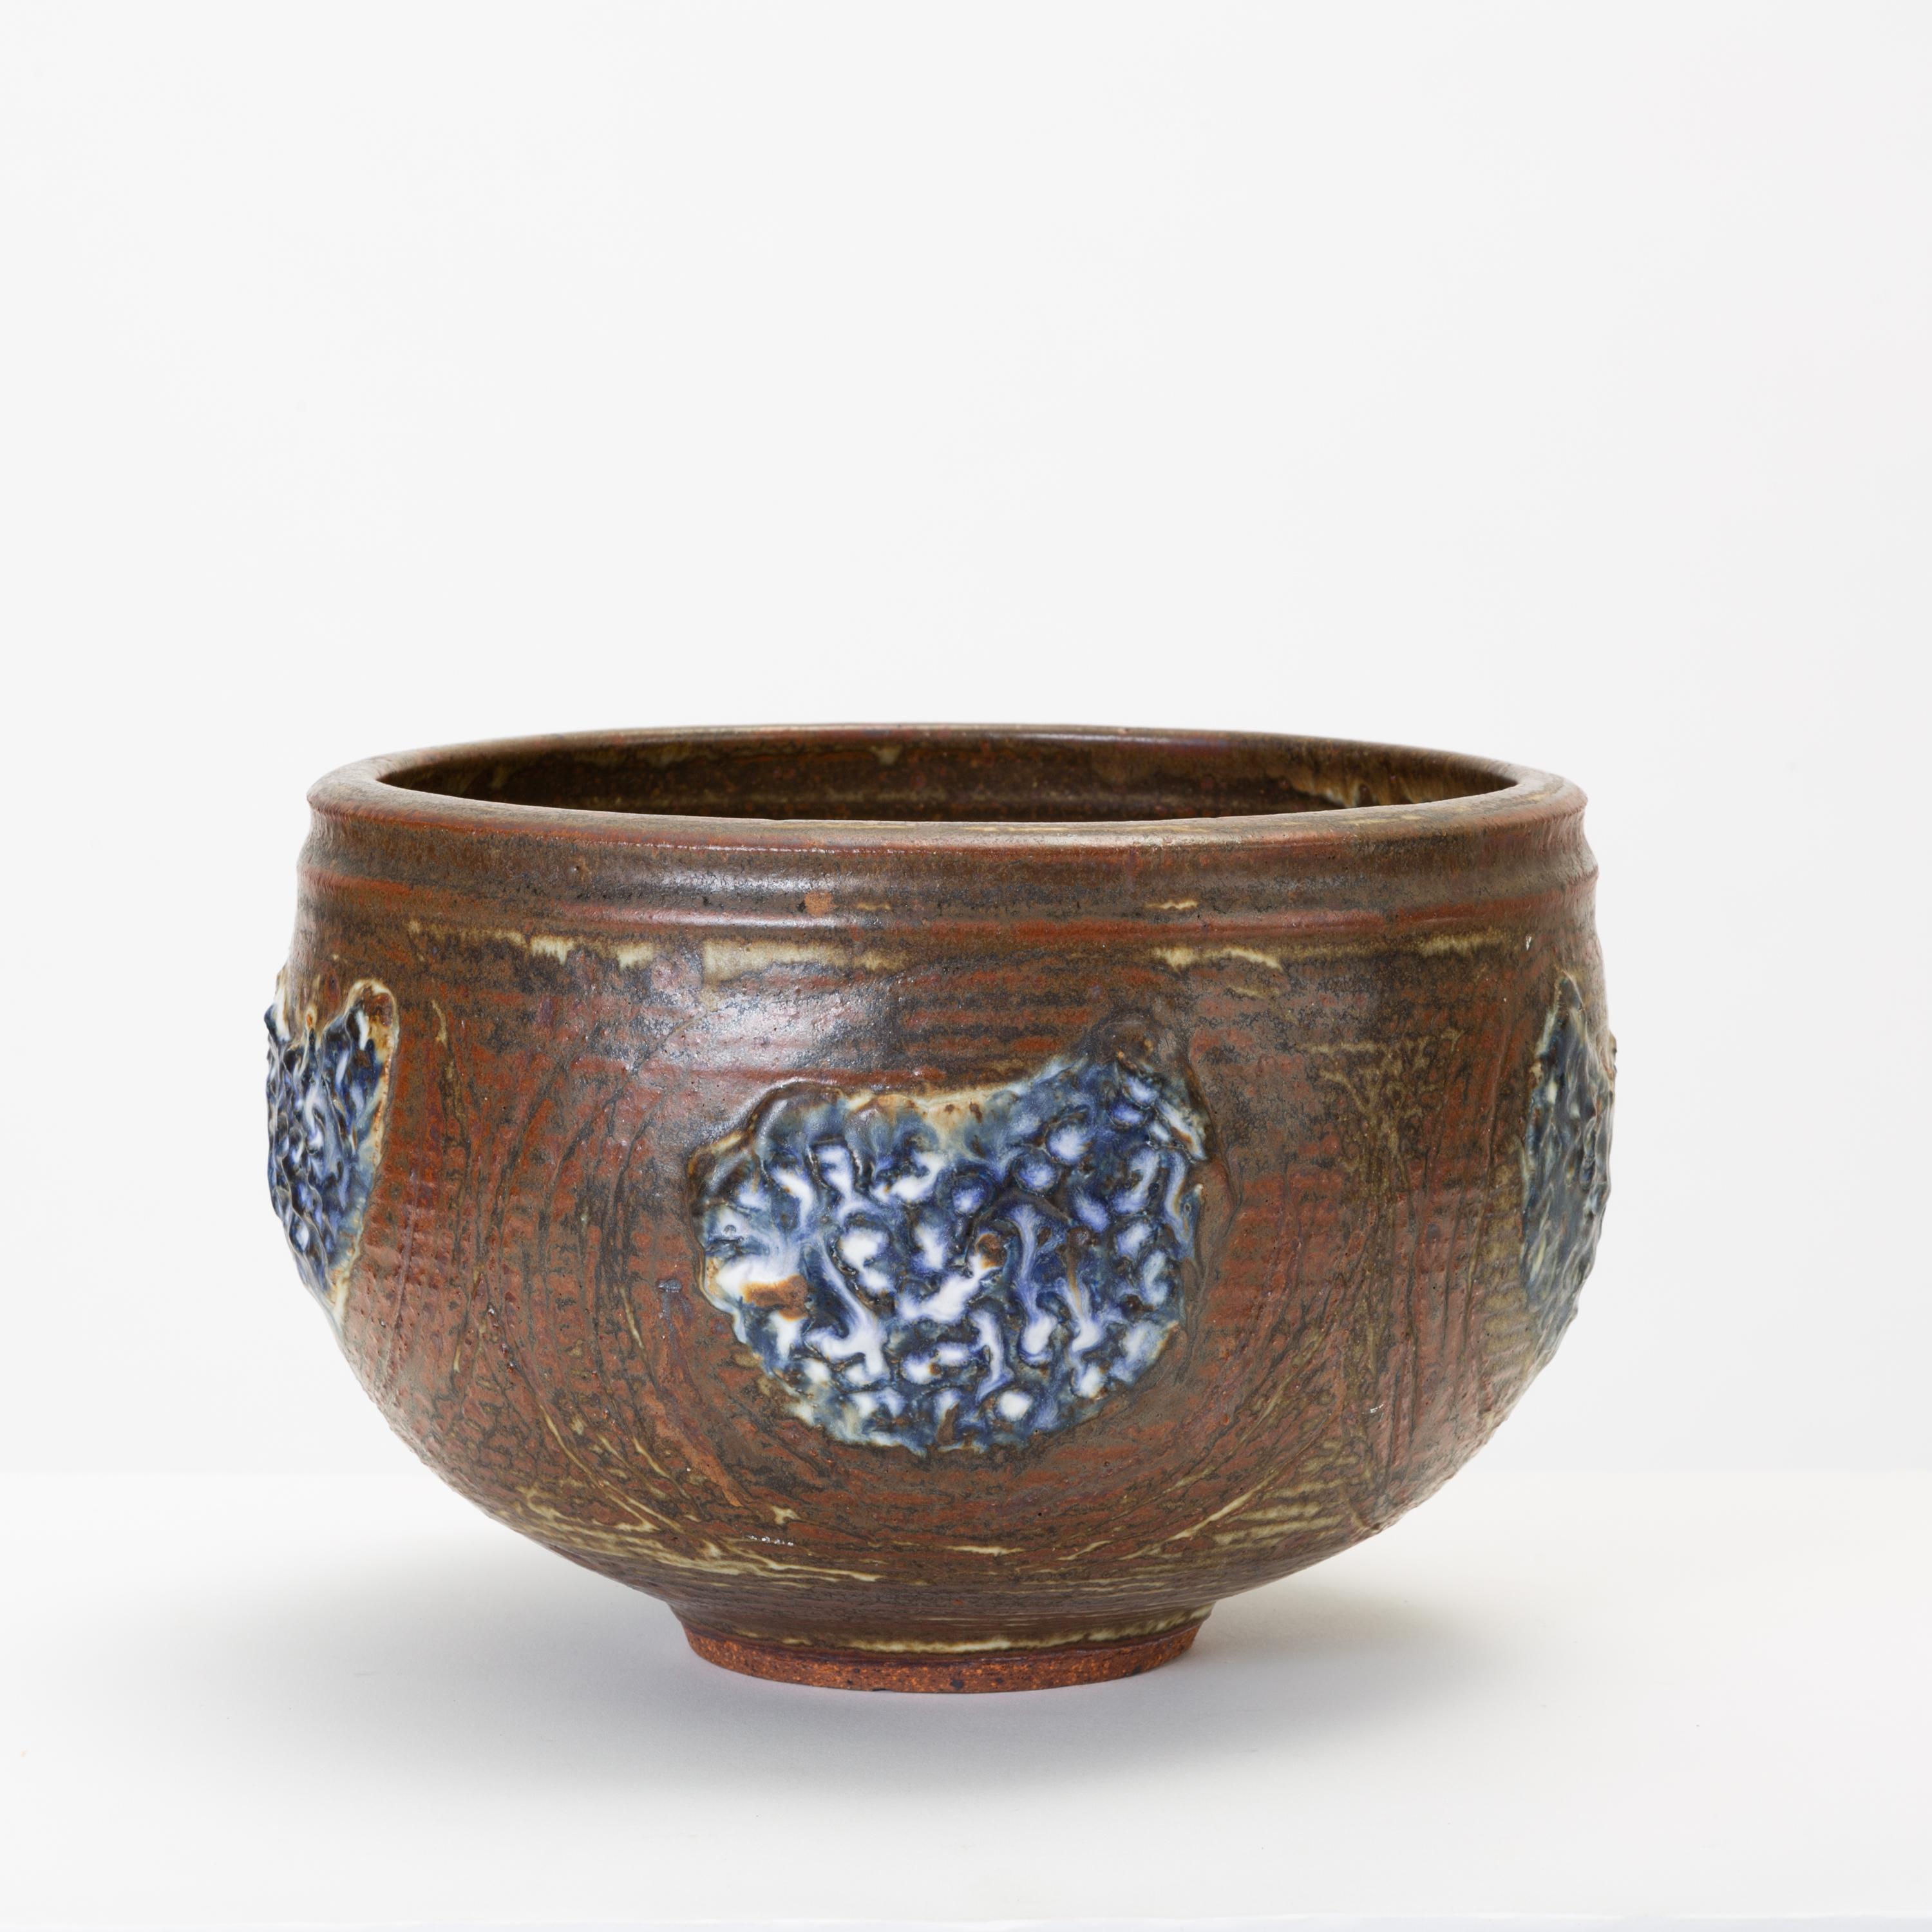 A large stoneware bowl by California-based modern ceramicists Vivika and Otto Heino is wheel-thrown with an irregular brown glaze and appliquéd decoration in a deep, royal blue. The glazed interior is gray and slightly speckled. Signed on